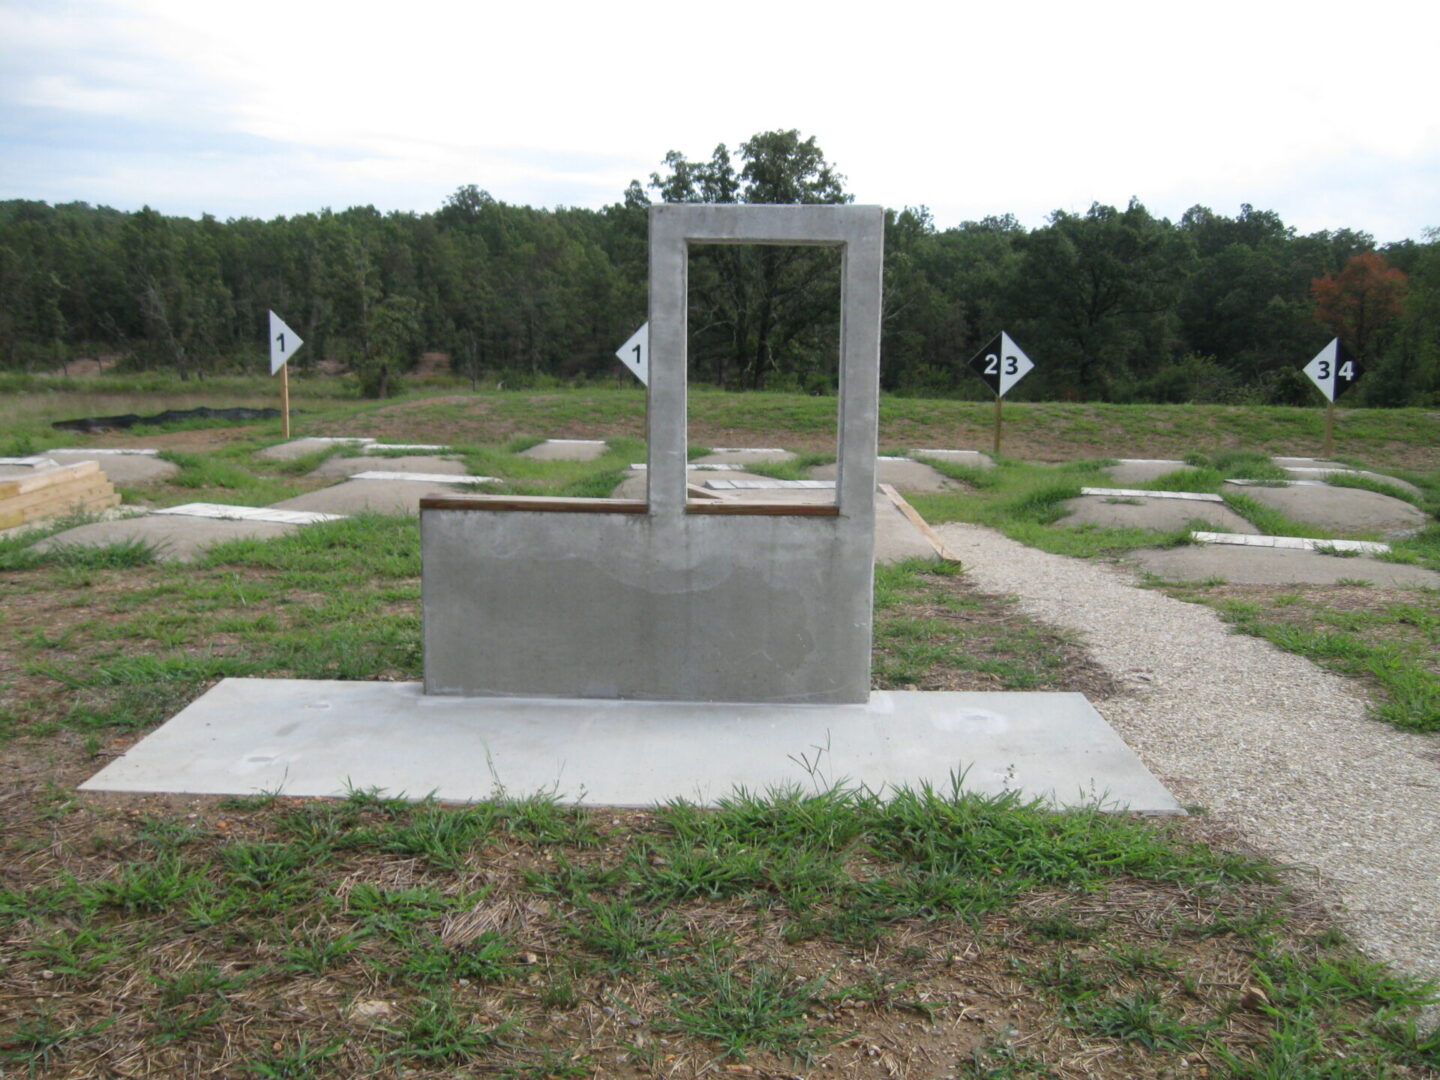 Concrete shooting range stations with numbered signs in a grassy outdoor area.